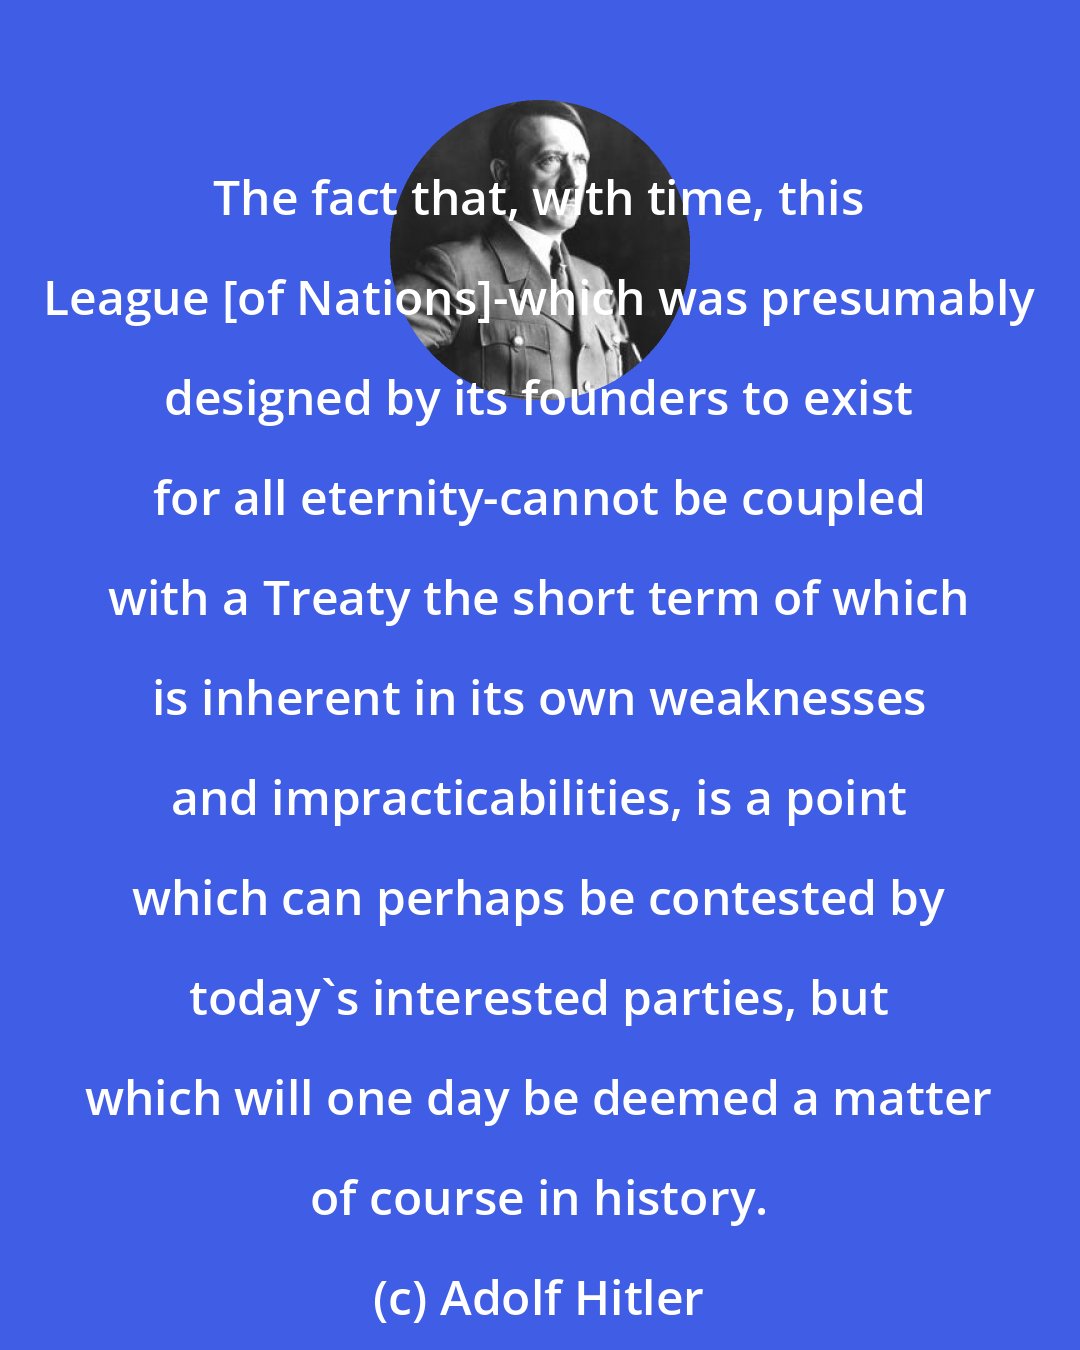 Adolf Hitler: The fact that, with time, this League [of Nations]-which was presumably designed by its founders to exist for all eternity-cannot be coupled with a Treaty the short term of which is inherent in its own weaknesses and impracticabilities, is a point which can perhaps be contested by today's interested parties, but which will one day be deemed a matter of course in history.